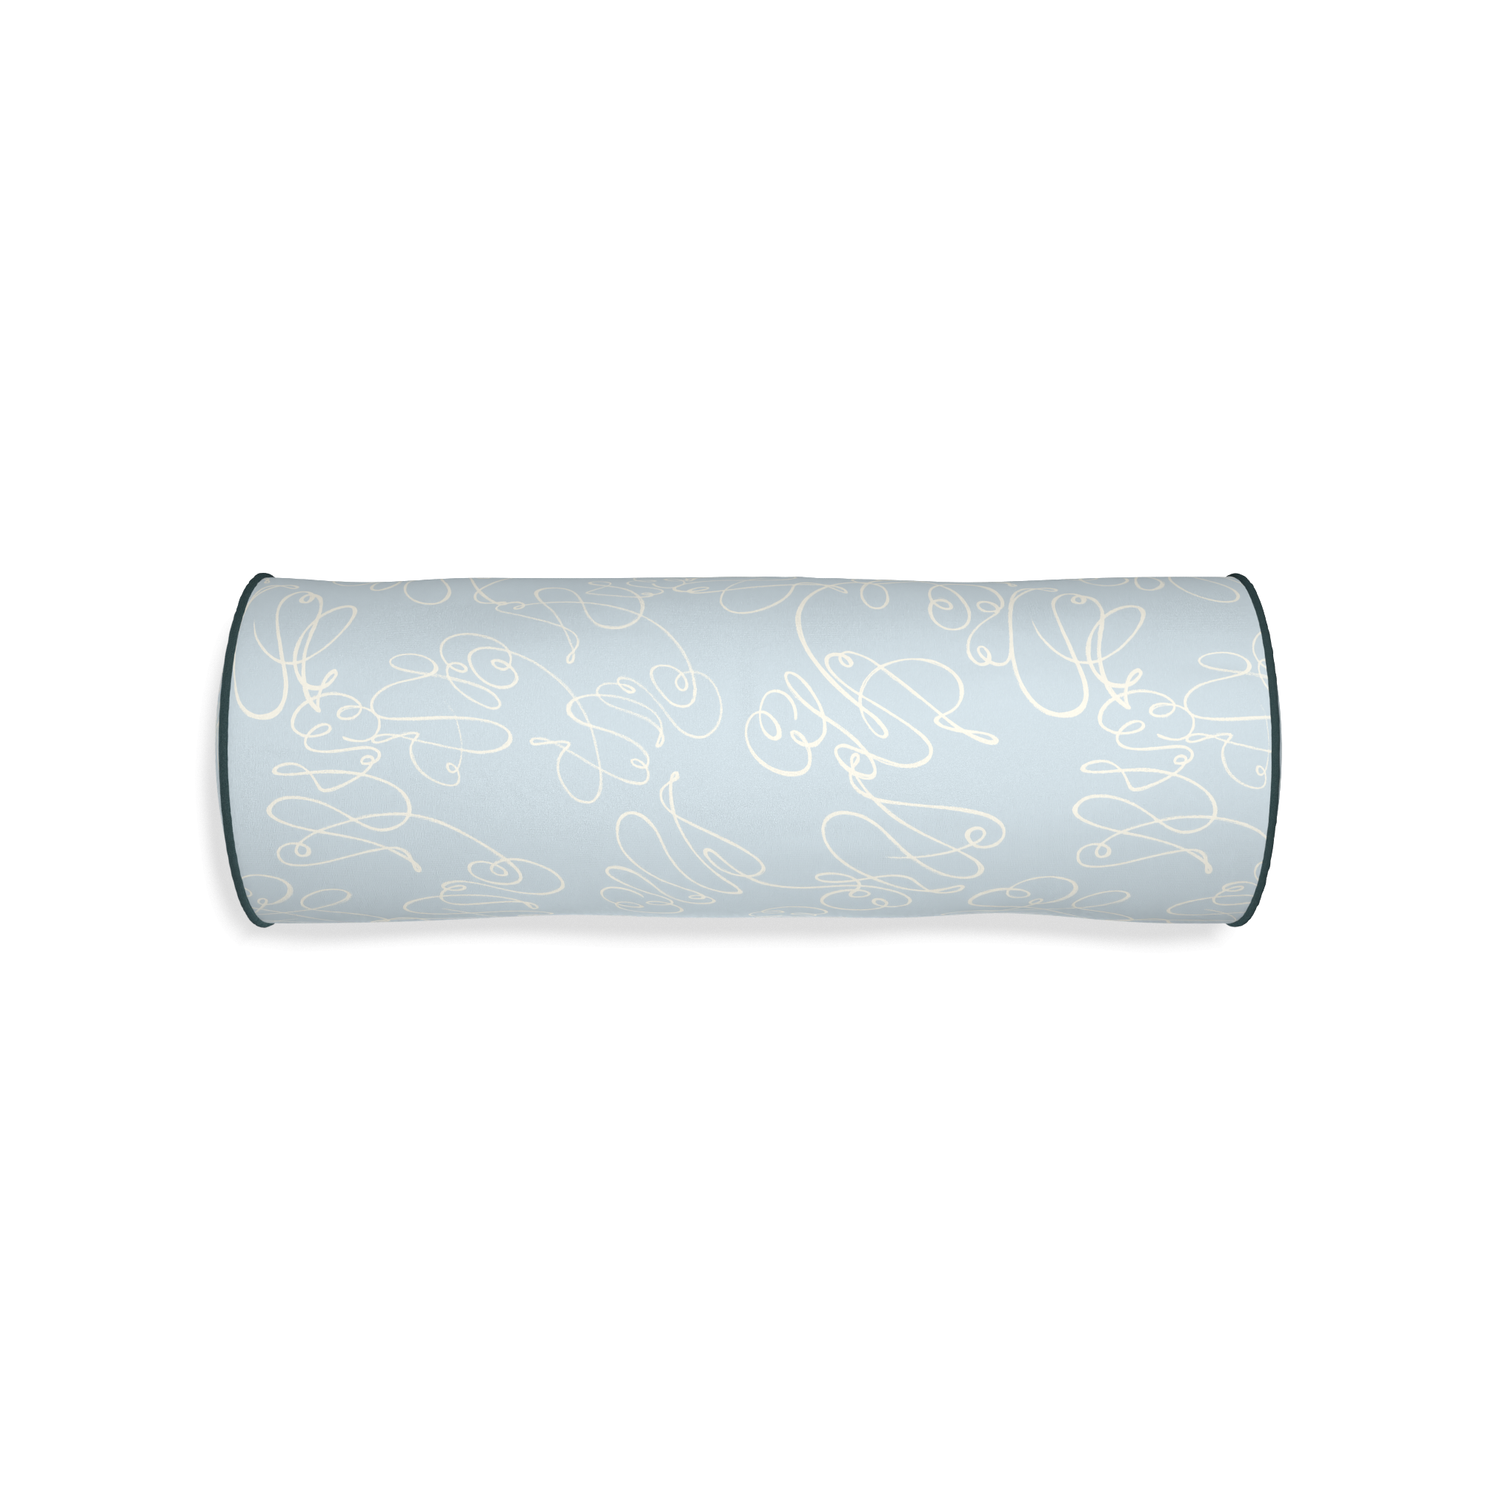 Bolster mirabella custom powder blue abstractpillow with p piping on white background